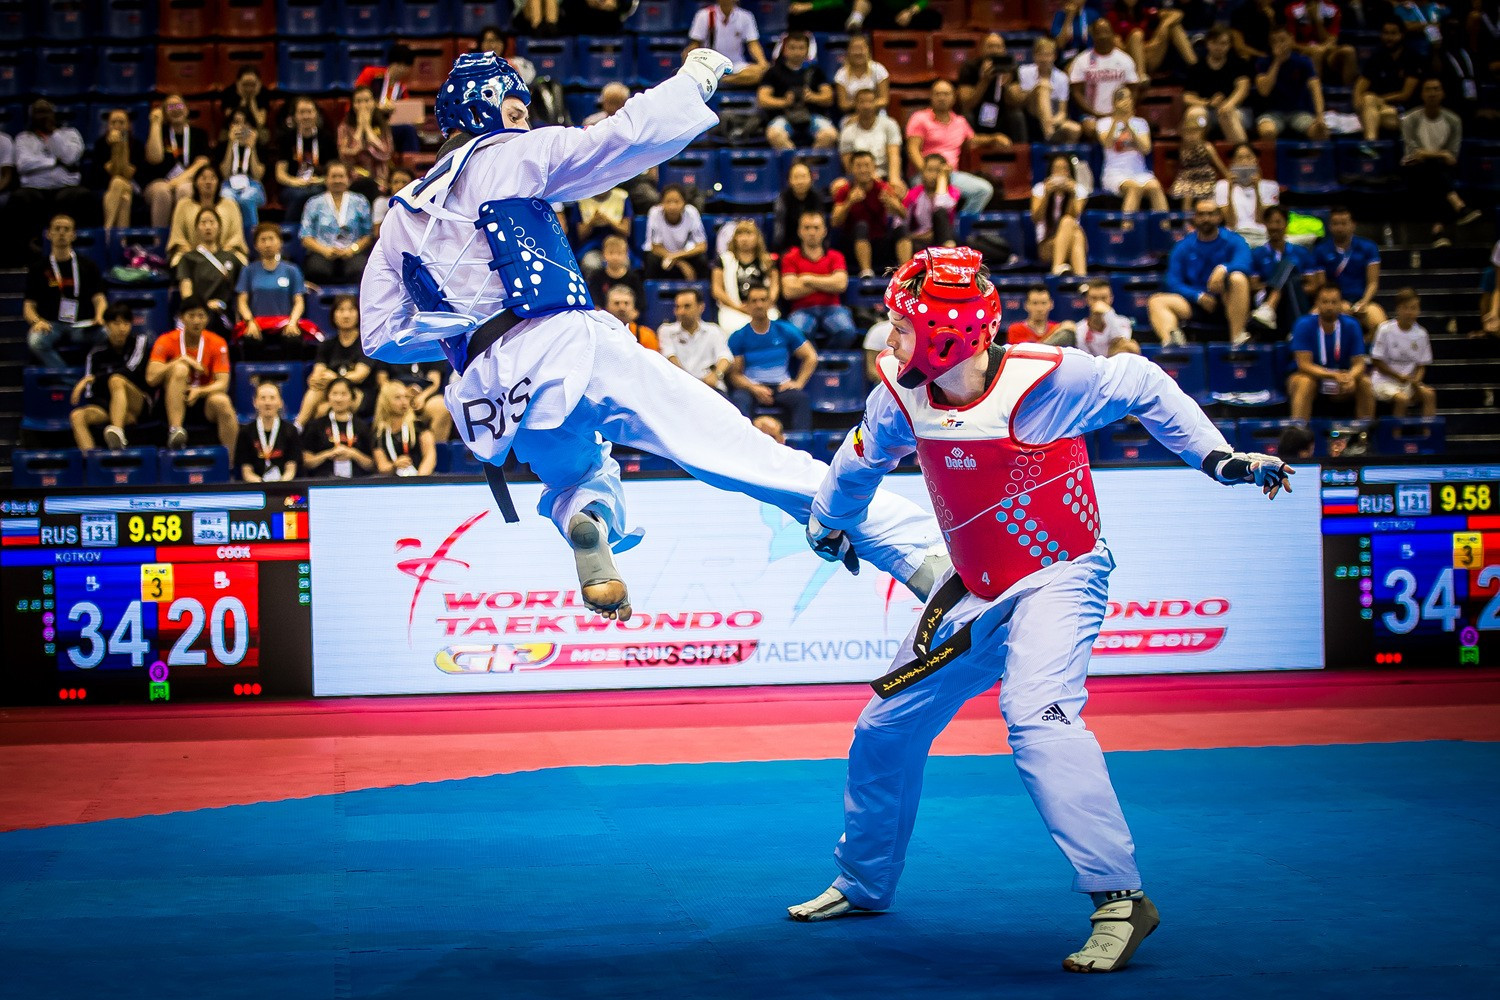 Kotkov overcomes Cook to claim thrilling gold medal at World Taekwondo Grand Prix in Moscow